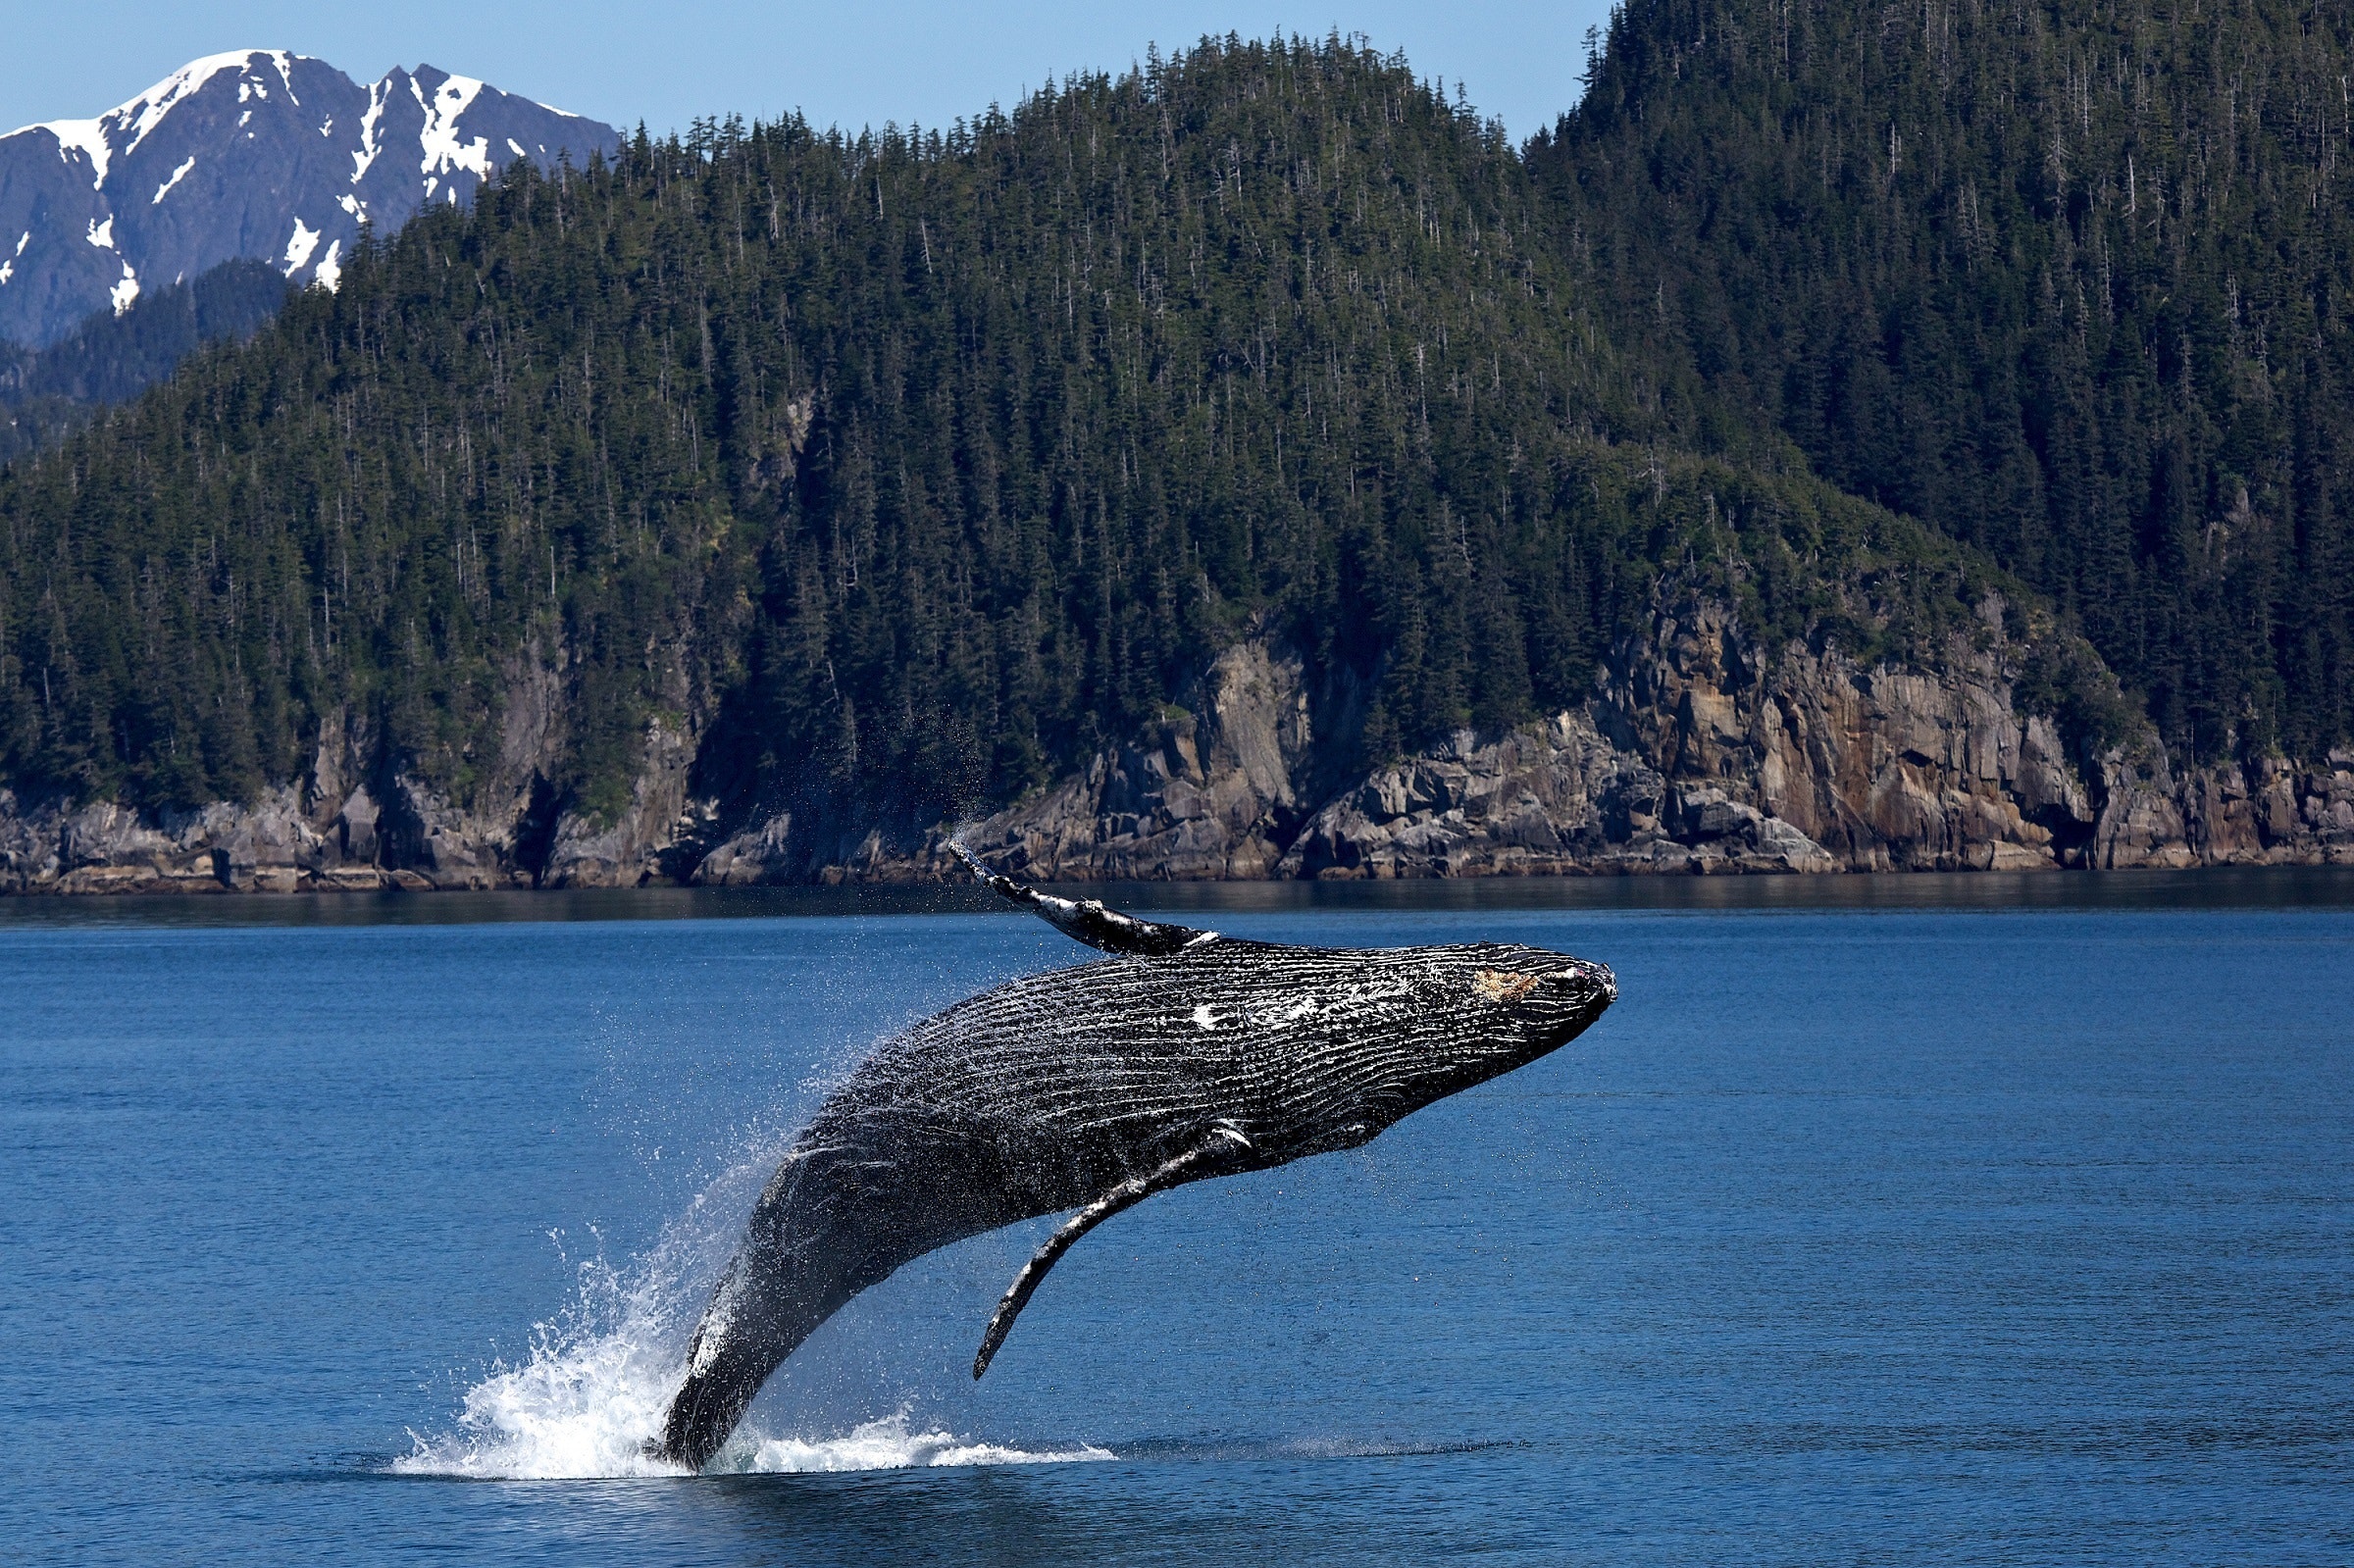 humpback pixabay 302271 World Whale Day and the Comeback of the Humpback Whale